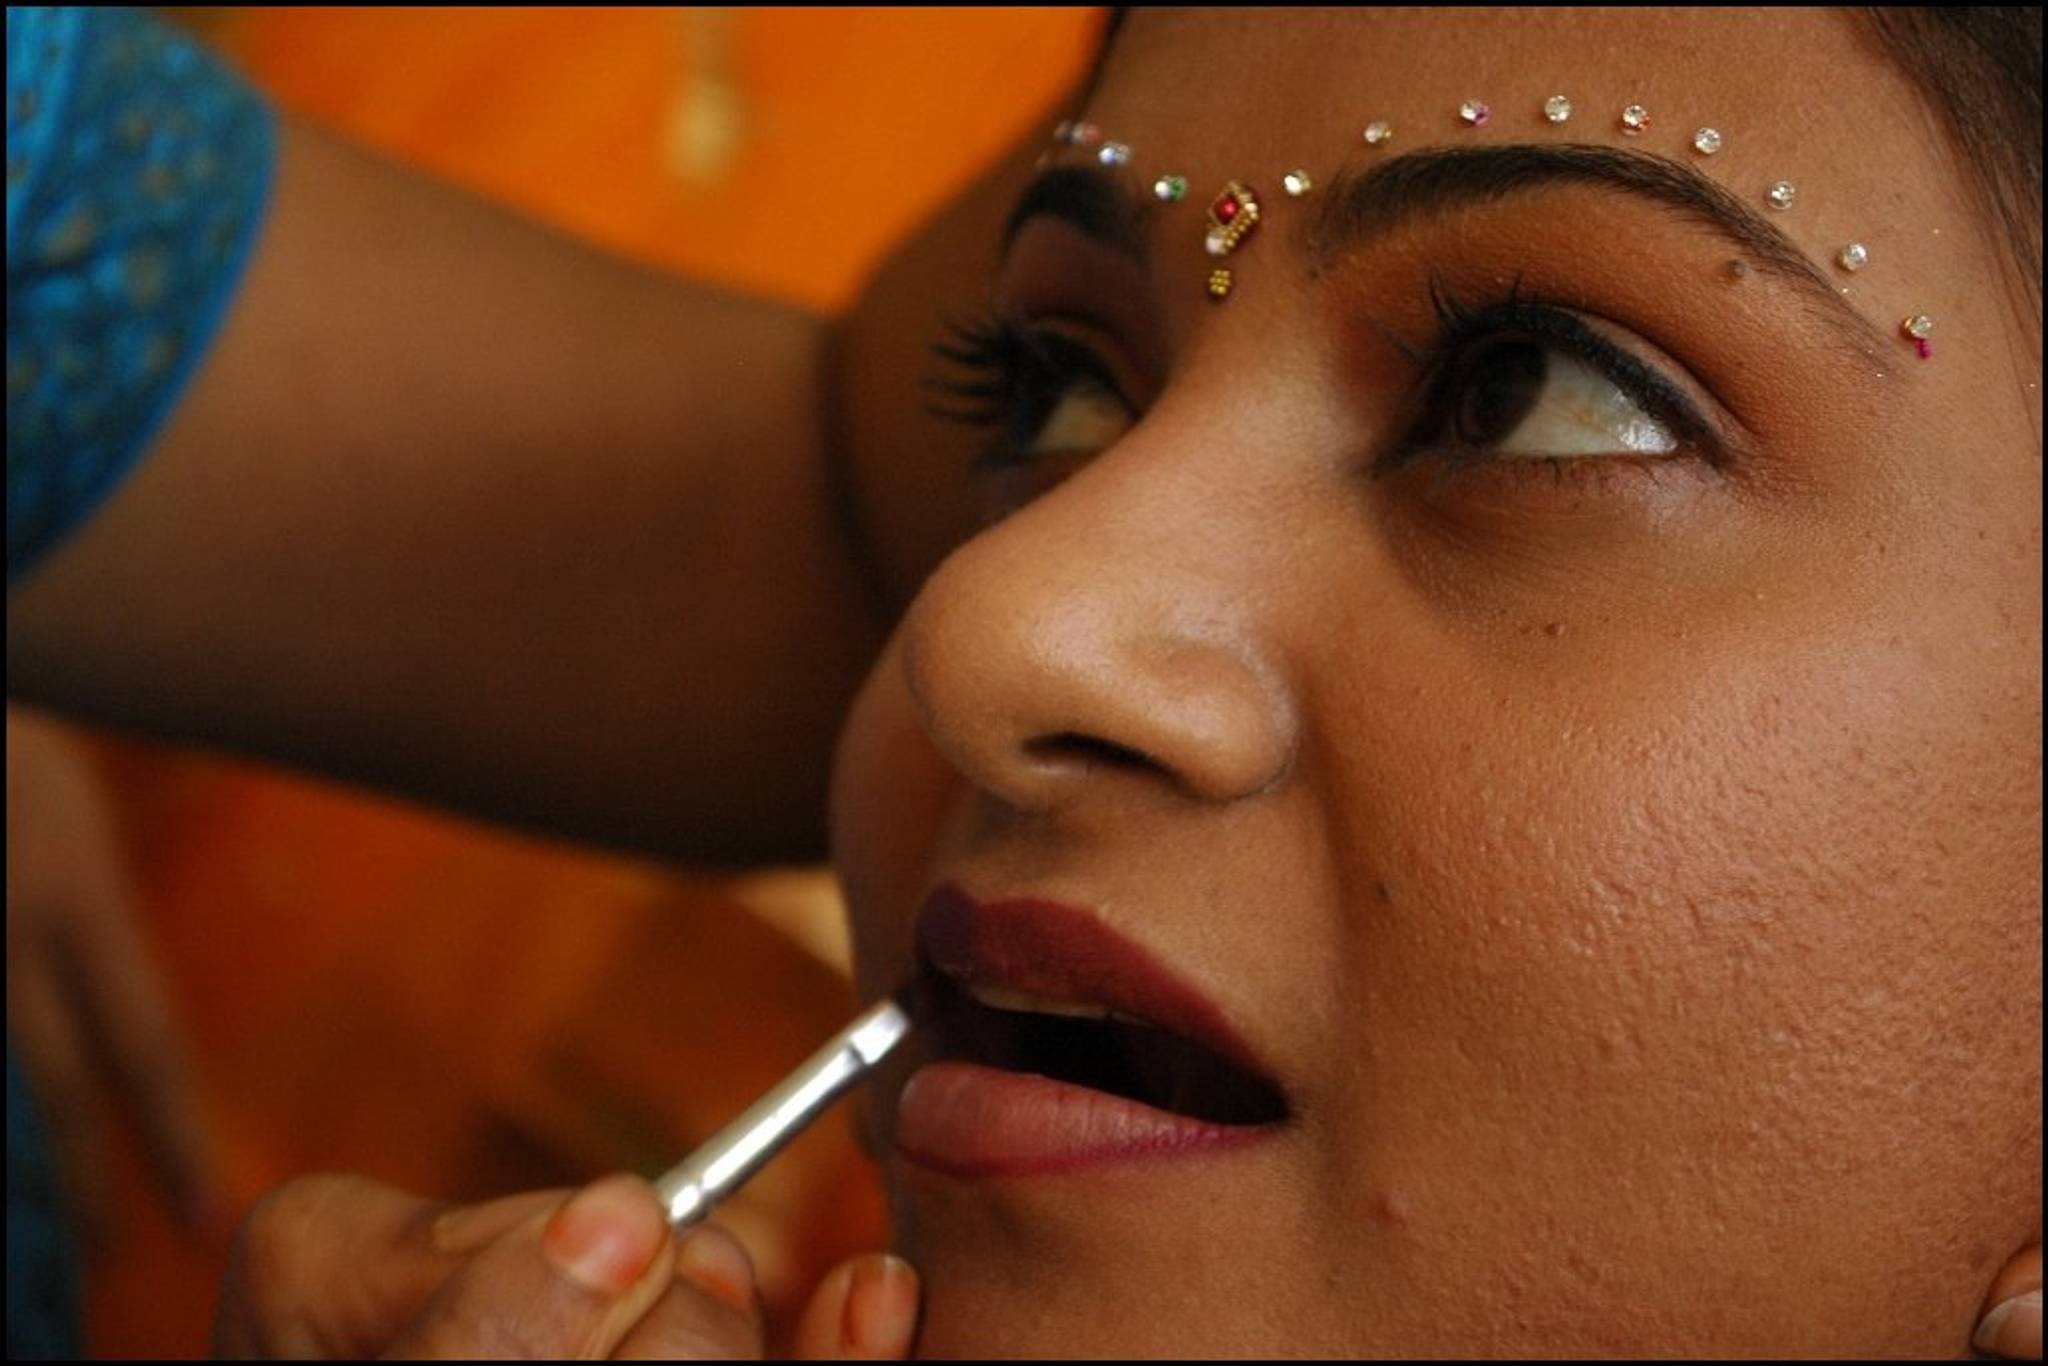 People in India are buying fewer beauty products